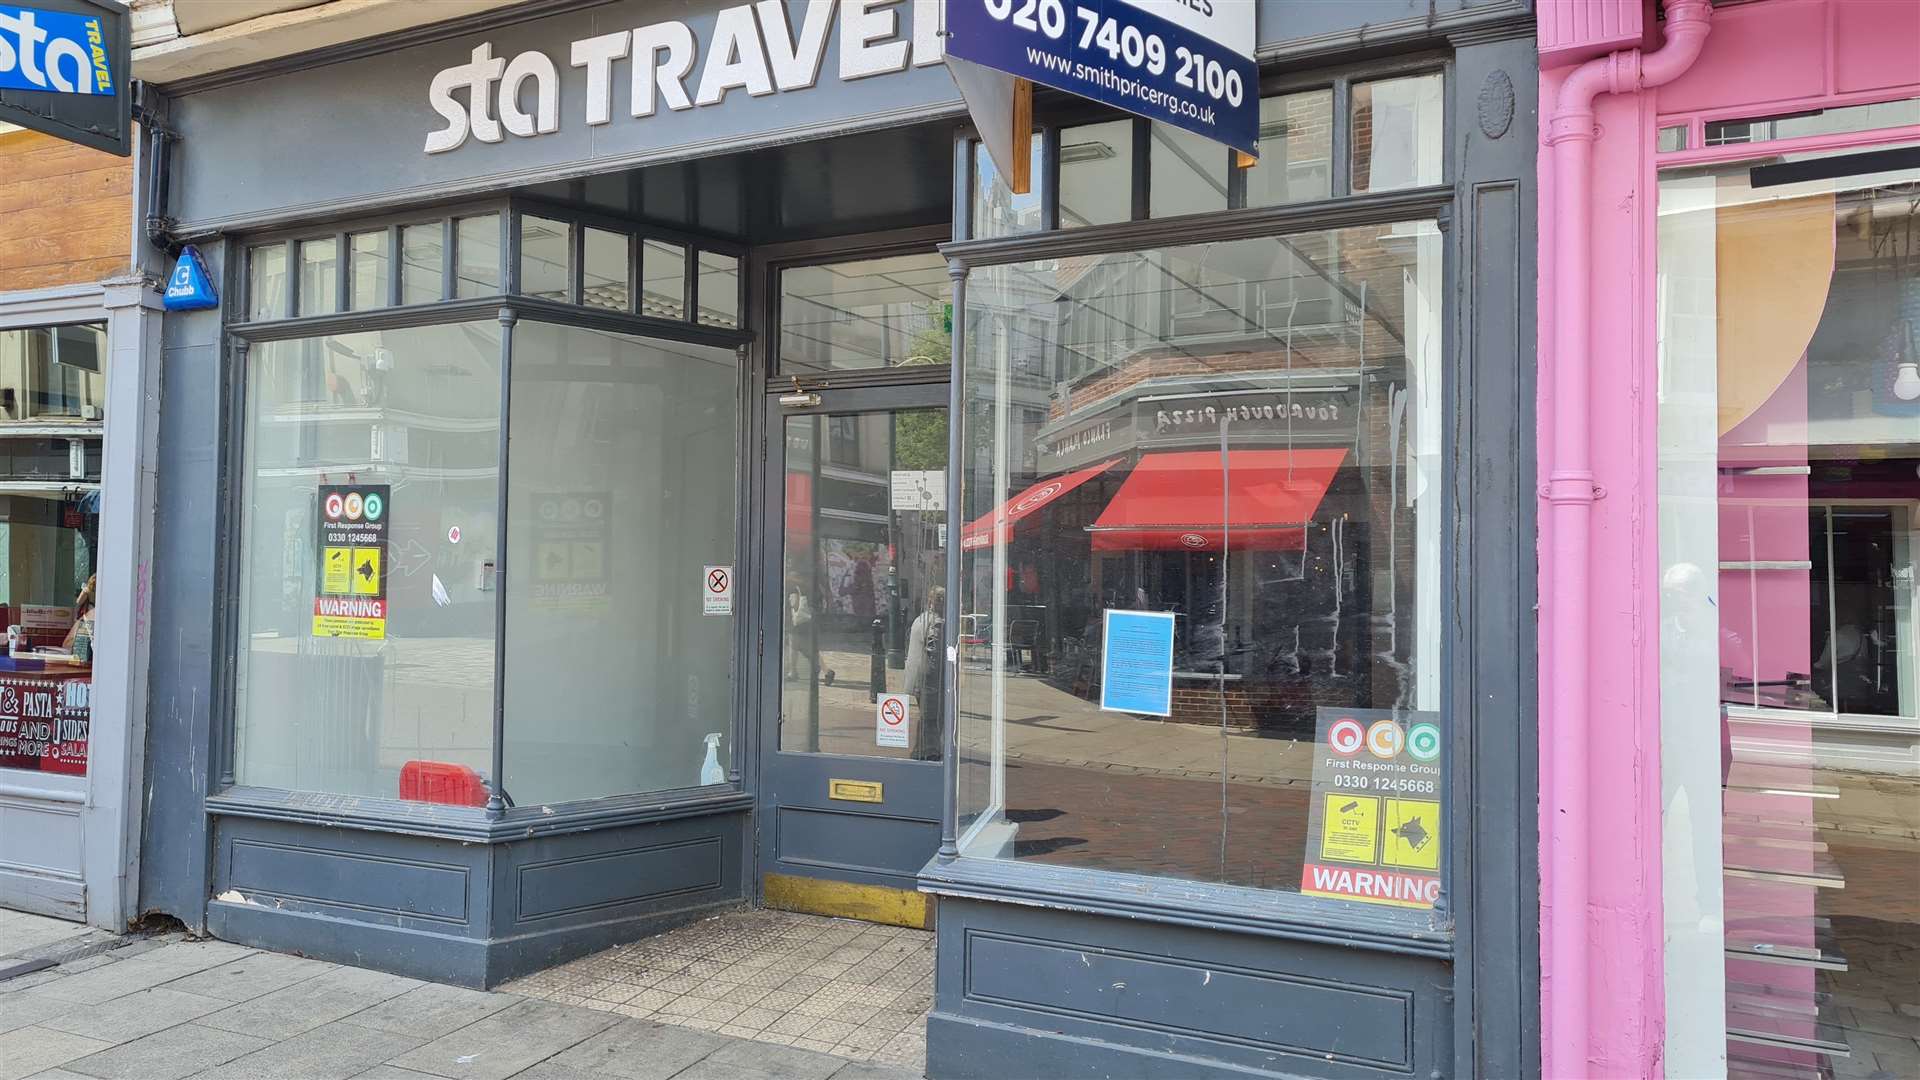 Mexican food restaurant Tortilla will take up residence in the high street soon